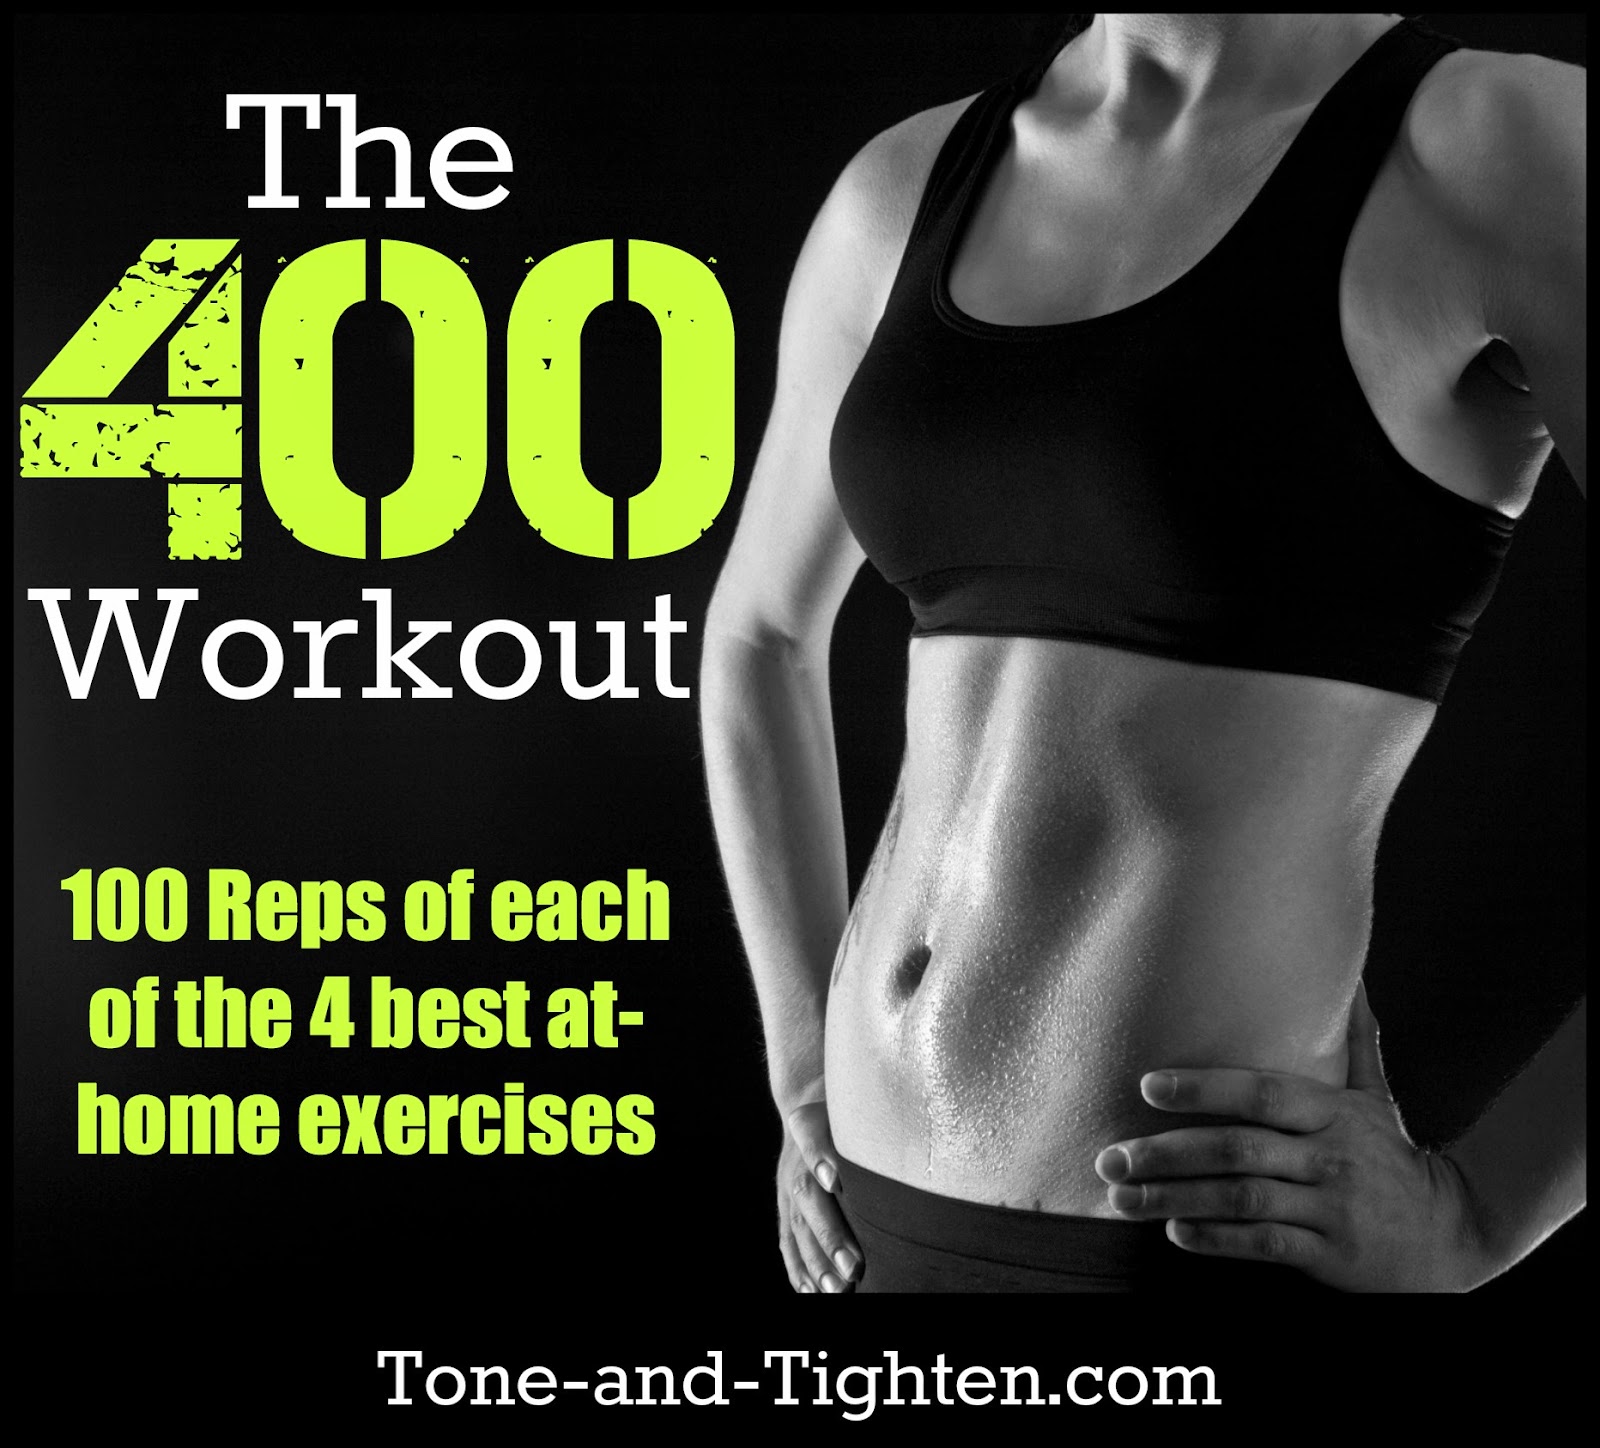 The 400 Workout – Quick, at-home, body-weight workout to tone and tighten!